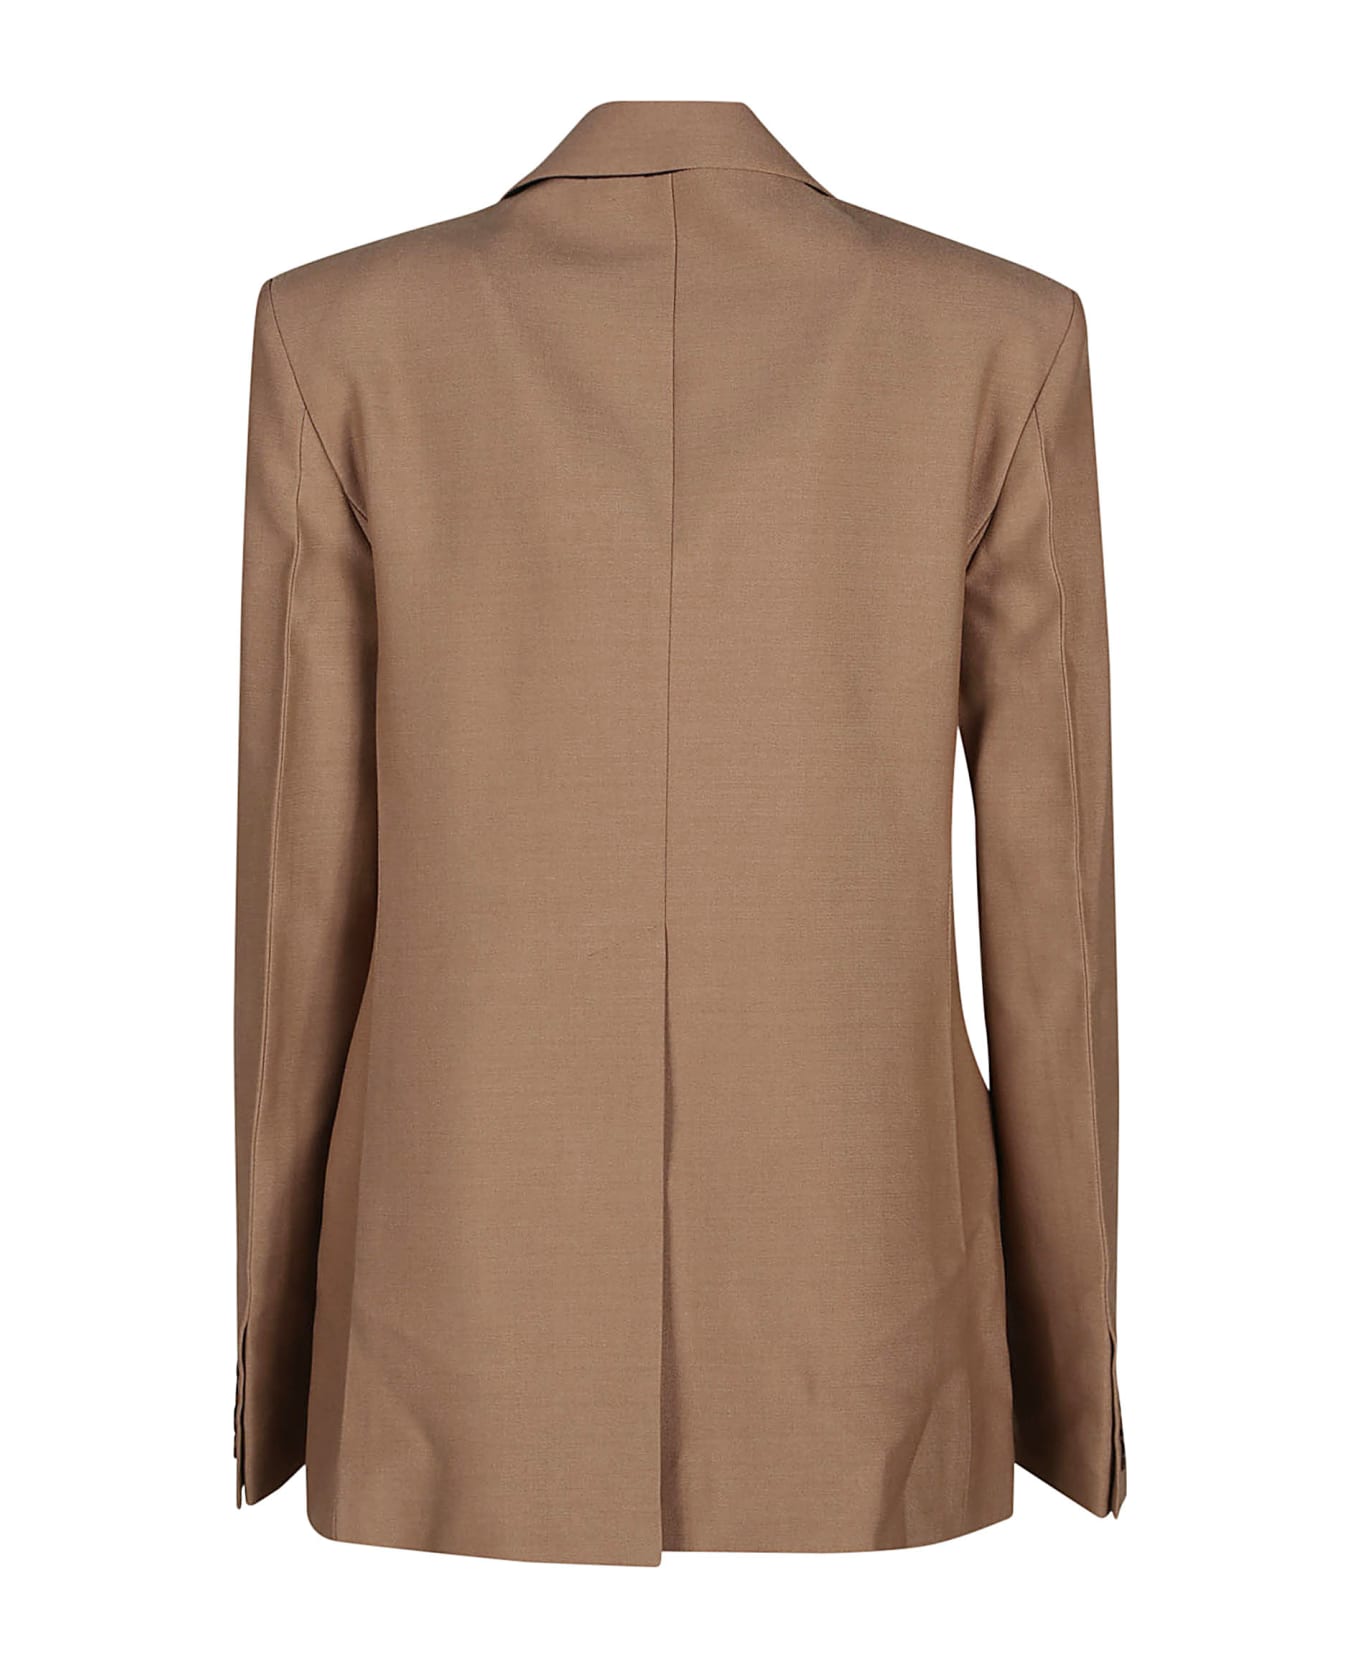 Victoria Beckham Asymetric Double Layer Jacket - Fawn ブレザー